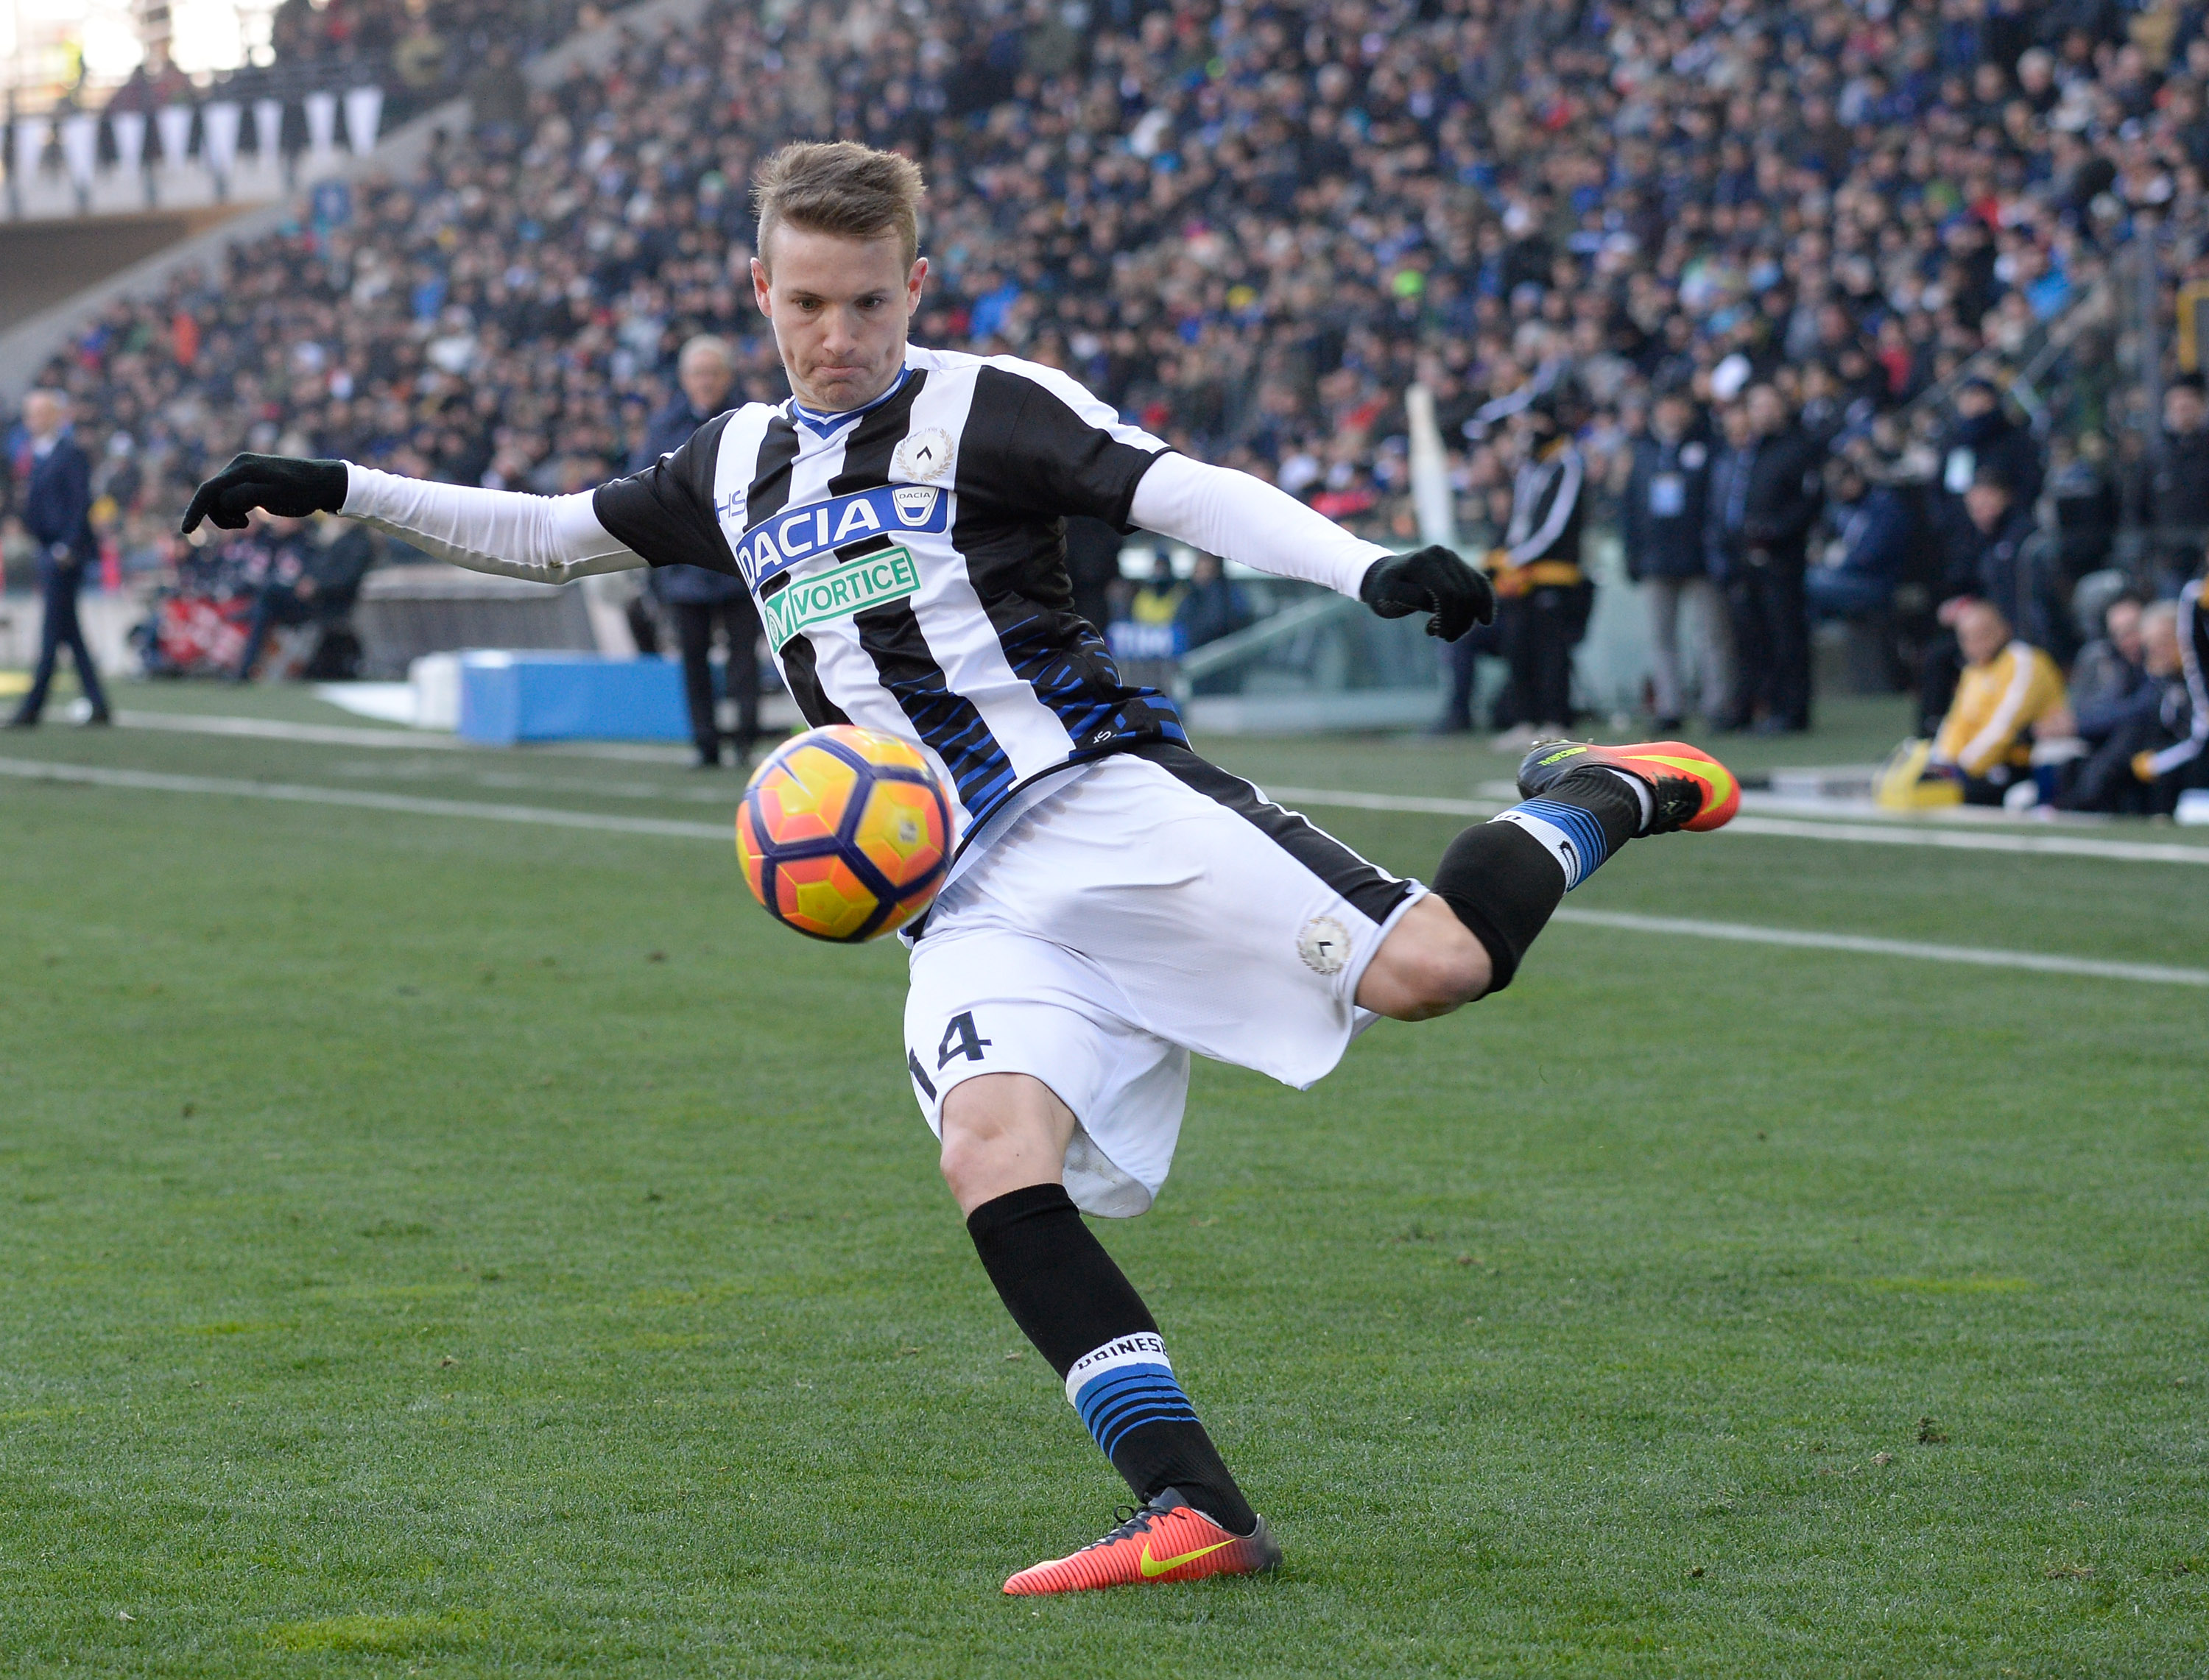 UDINE, ITALY - JANUARY 08:  Jakub Jankto of Udinese Calcio in action during the Serie A match between Udinese Calcio and FC Internazionale at Stadio Friuli on January 8, 2017 in Udine, Italy.  (Photo by Dino Panato/Getty Images)